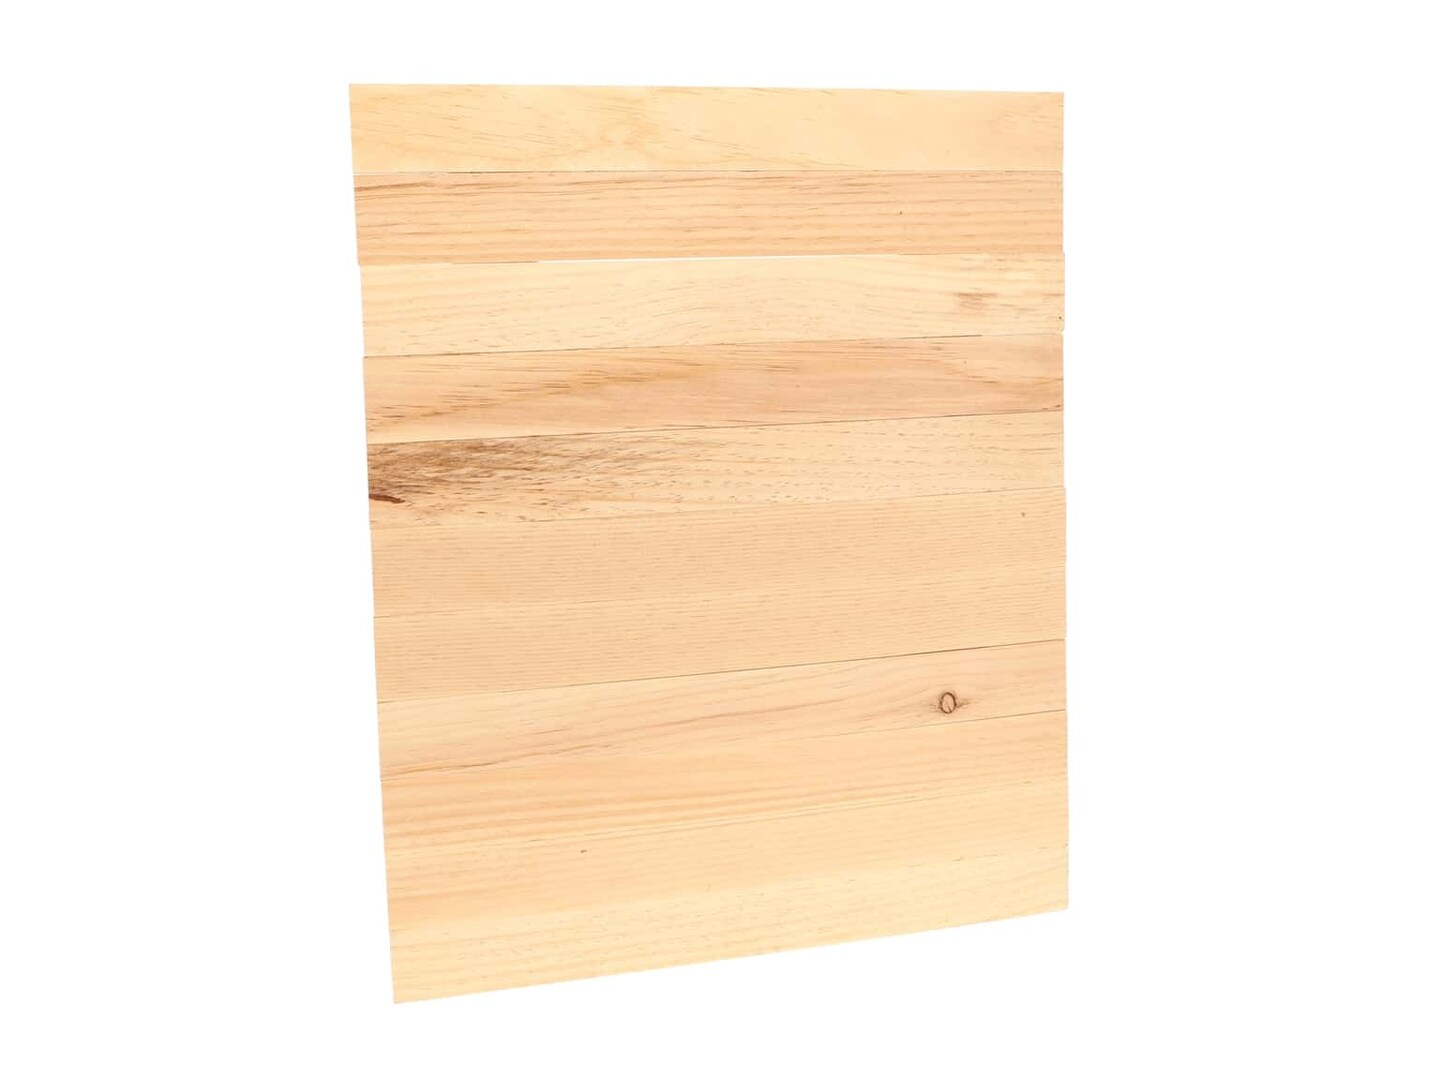 PA Good Wood Pallet Panel 20.5 in. x 16 in. With Box